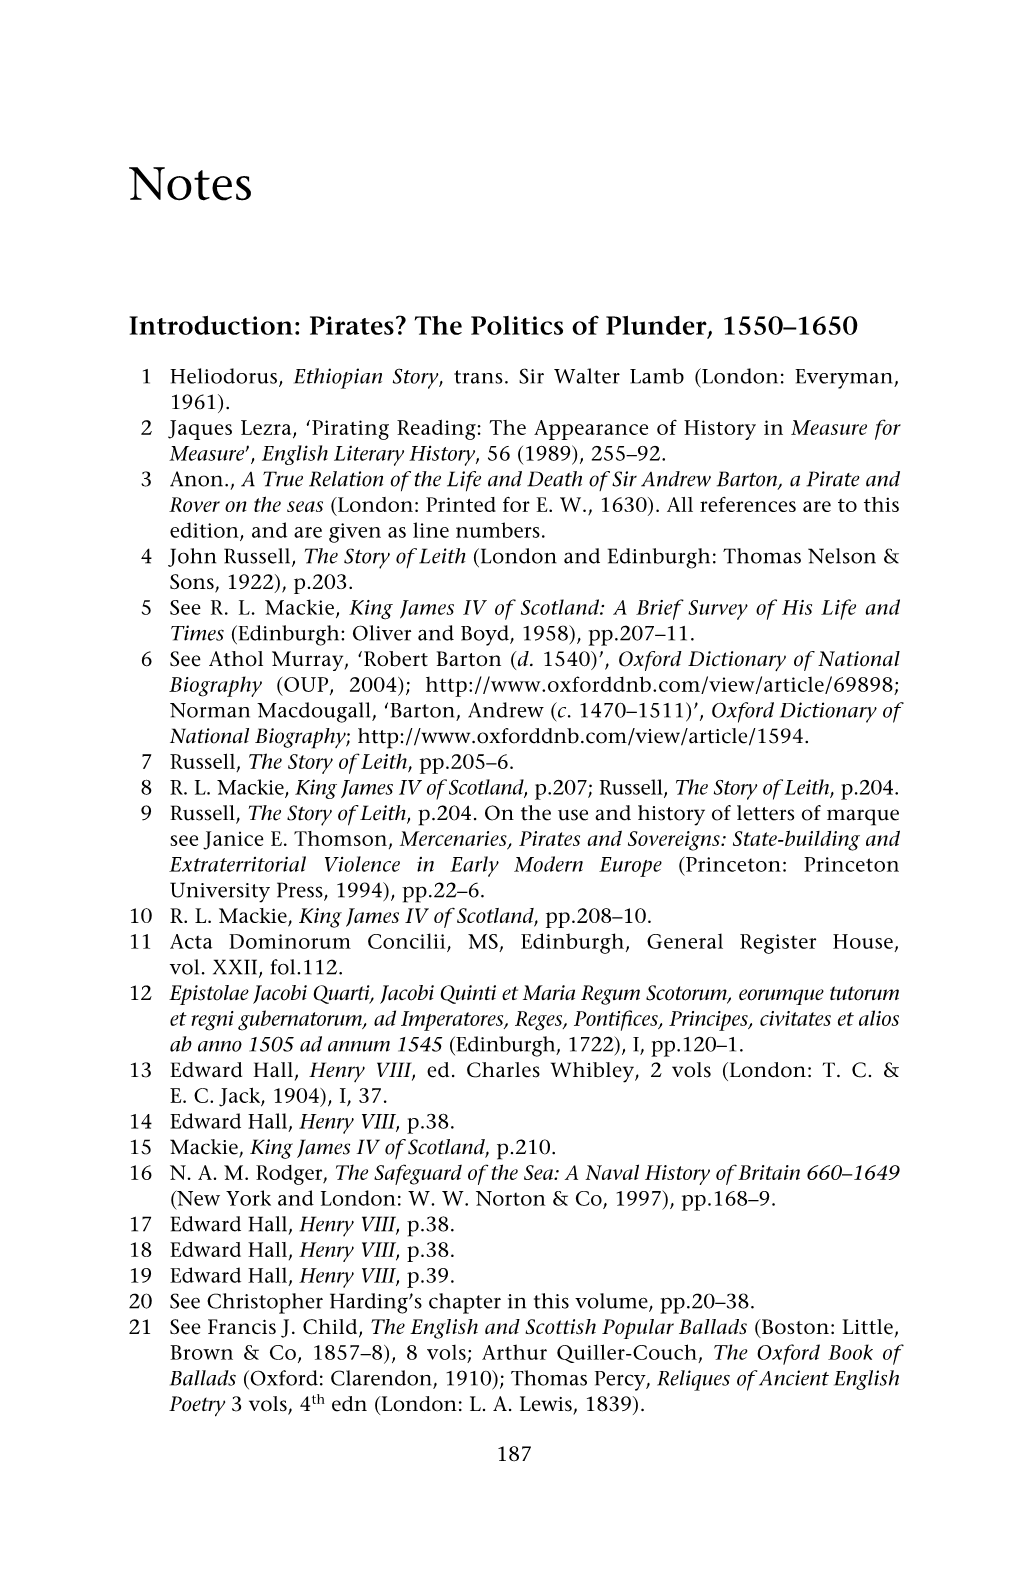 Introduction: Pirates? the Politics of Plunder, 1550–1650